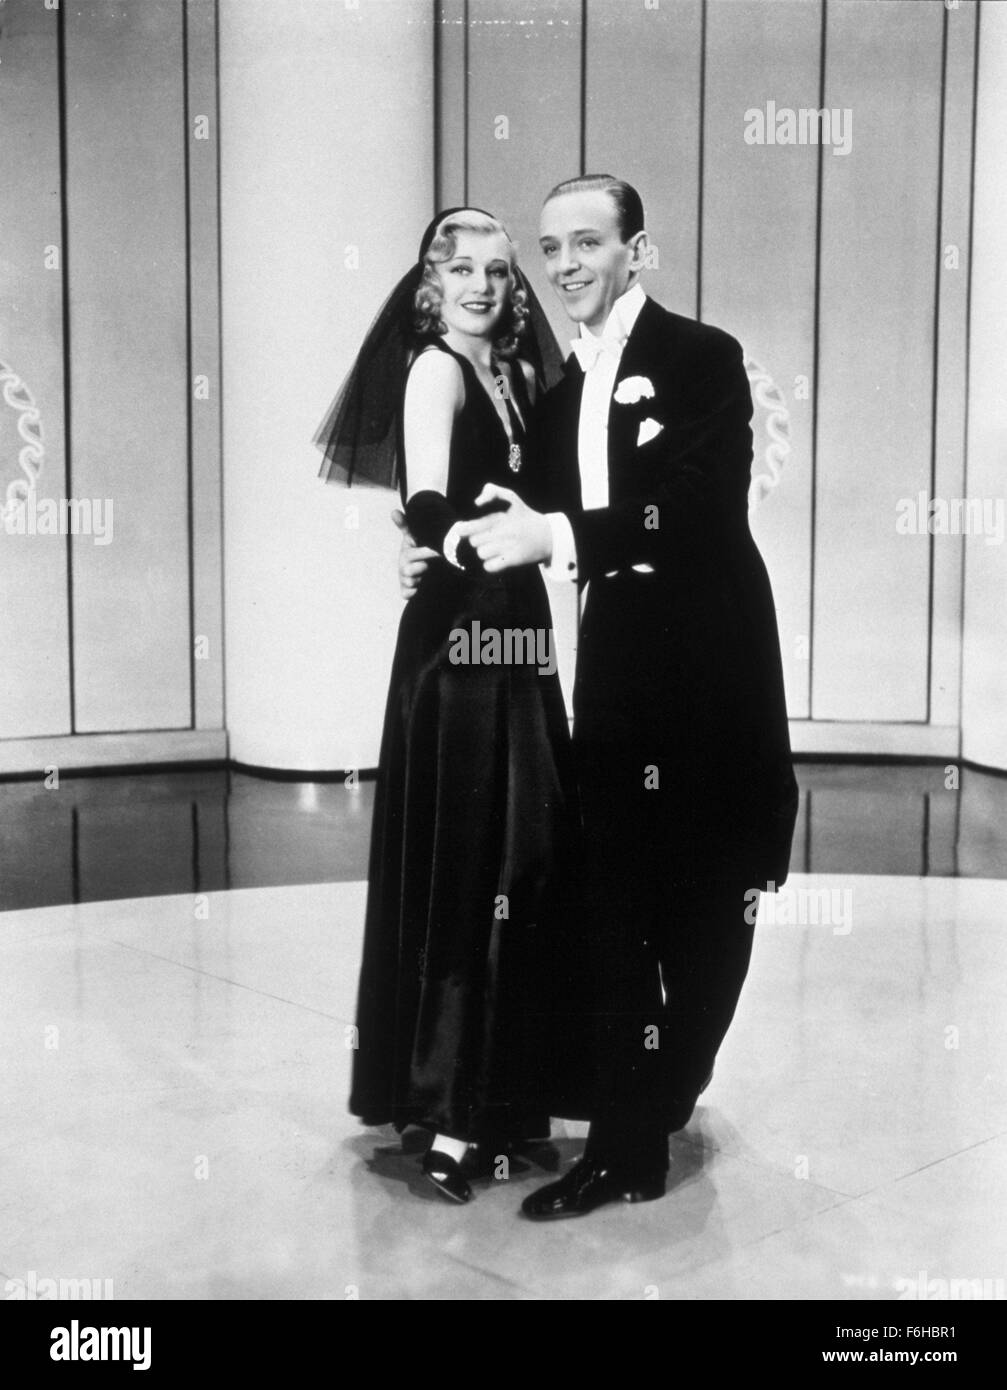 1937, Film Title: SHALL WE DANCE, Director: MARK SANDRICH, Studio: RKO, Pictured: FRED ASTAIRE, DANCING, GINGER ROGERS. (Credit Image: SNAP) Stock Photo